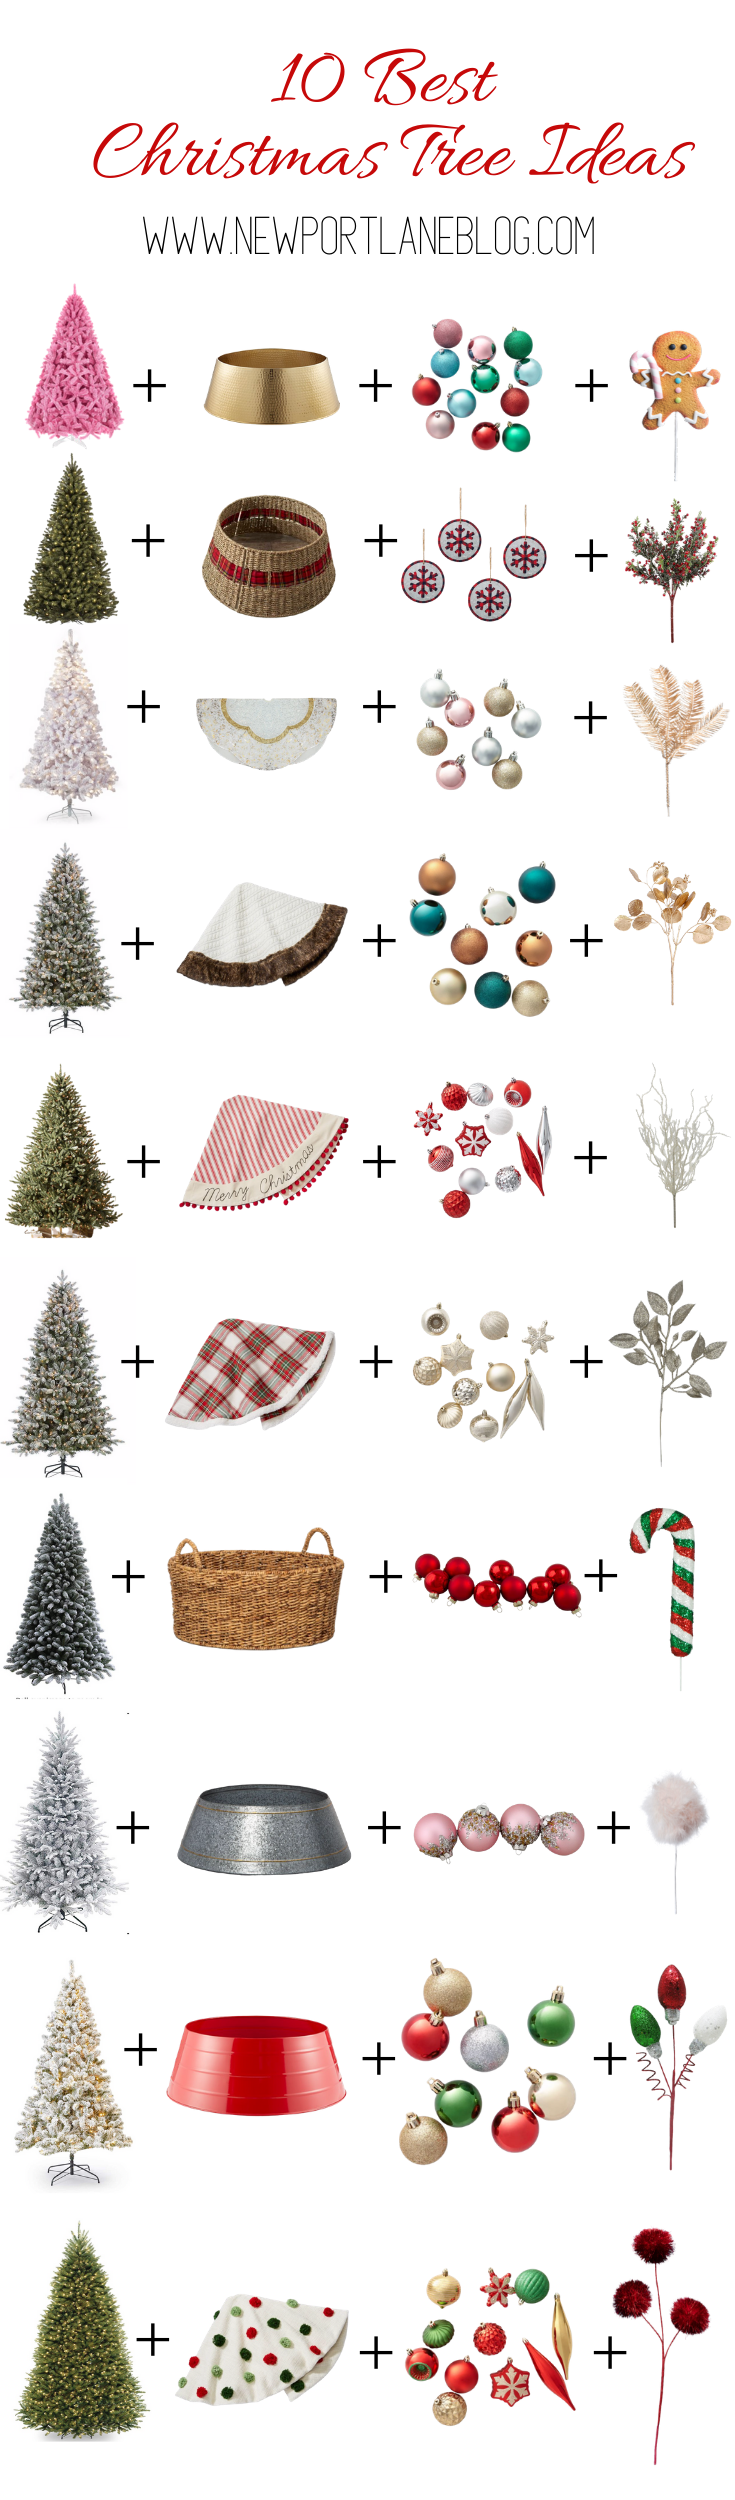 10 Best Christmas Tree Ideas for 2019. Glam Tree, Rustic Tree, Red and Green Tree, Tree Collar, Tree Skirt. #christmastree #bestchristmastreeideas